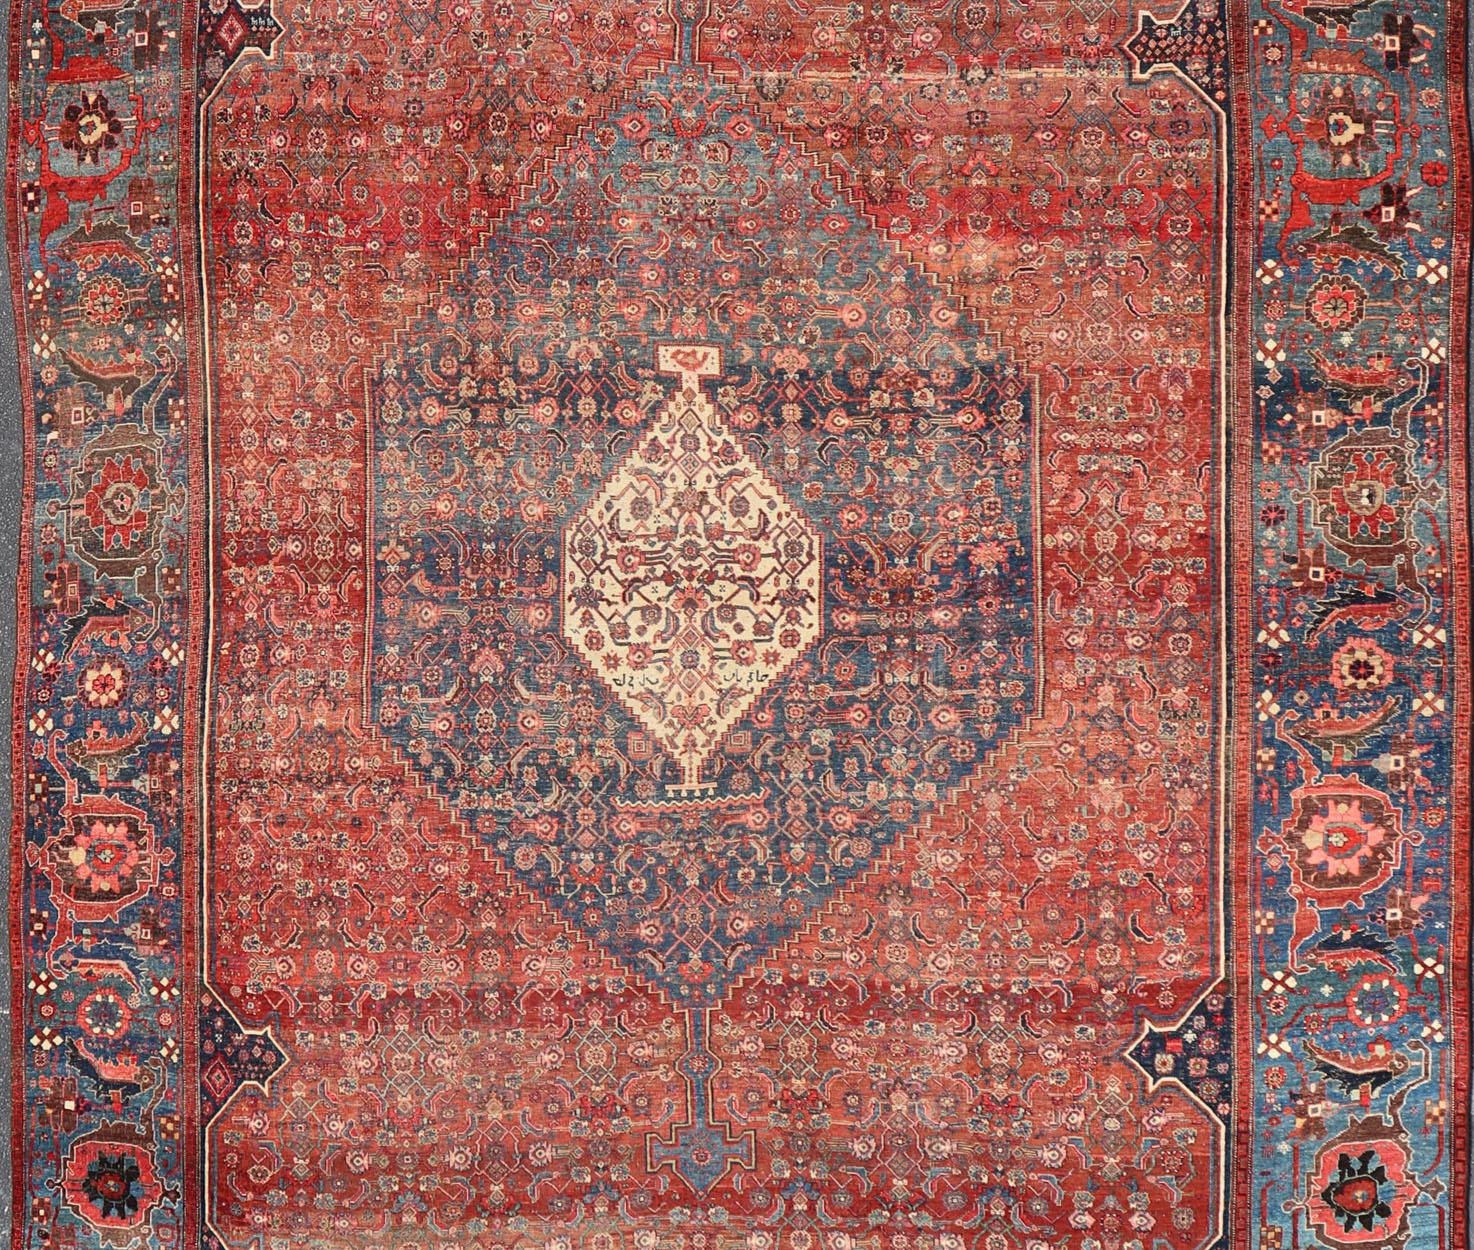 Tabriz Very Large Antique Persian Bidjar Rug in Multi Shades of Blue, Tera-Cotta & Red For Sale